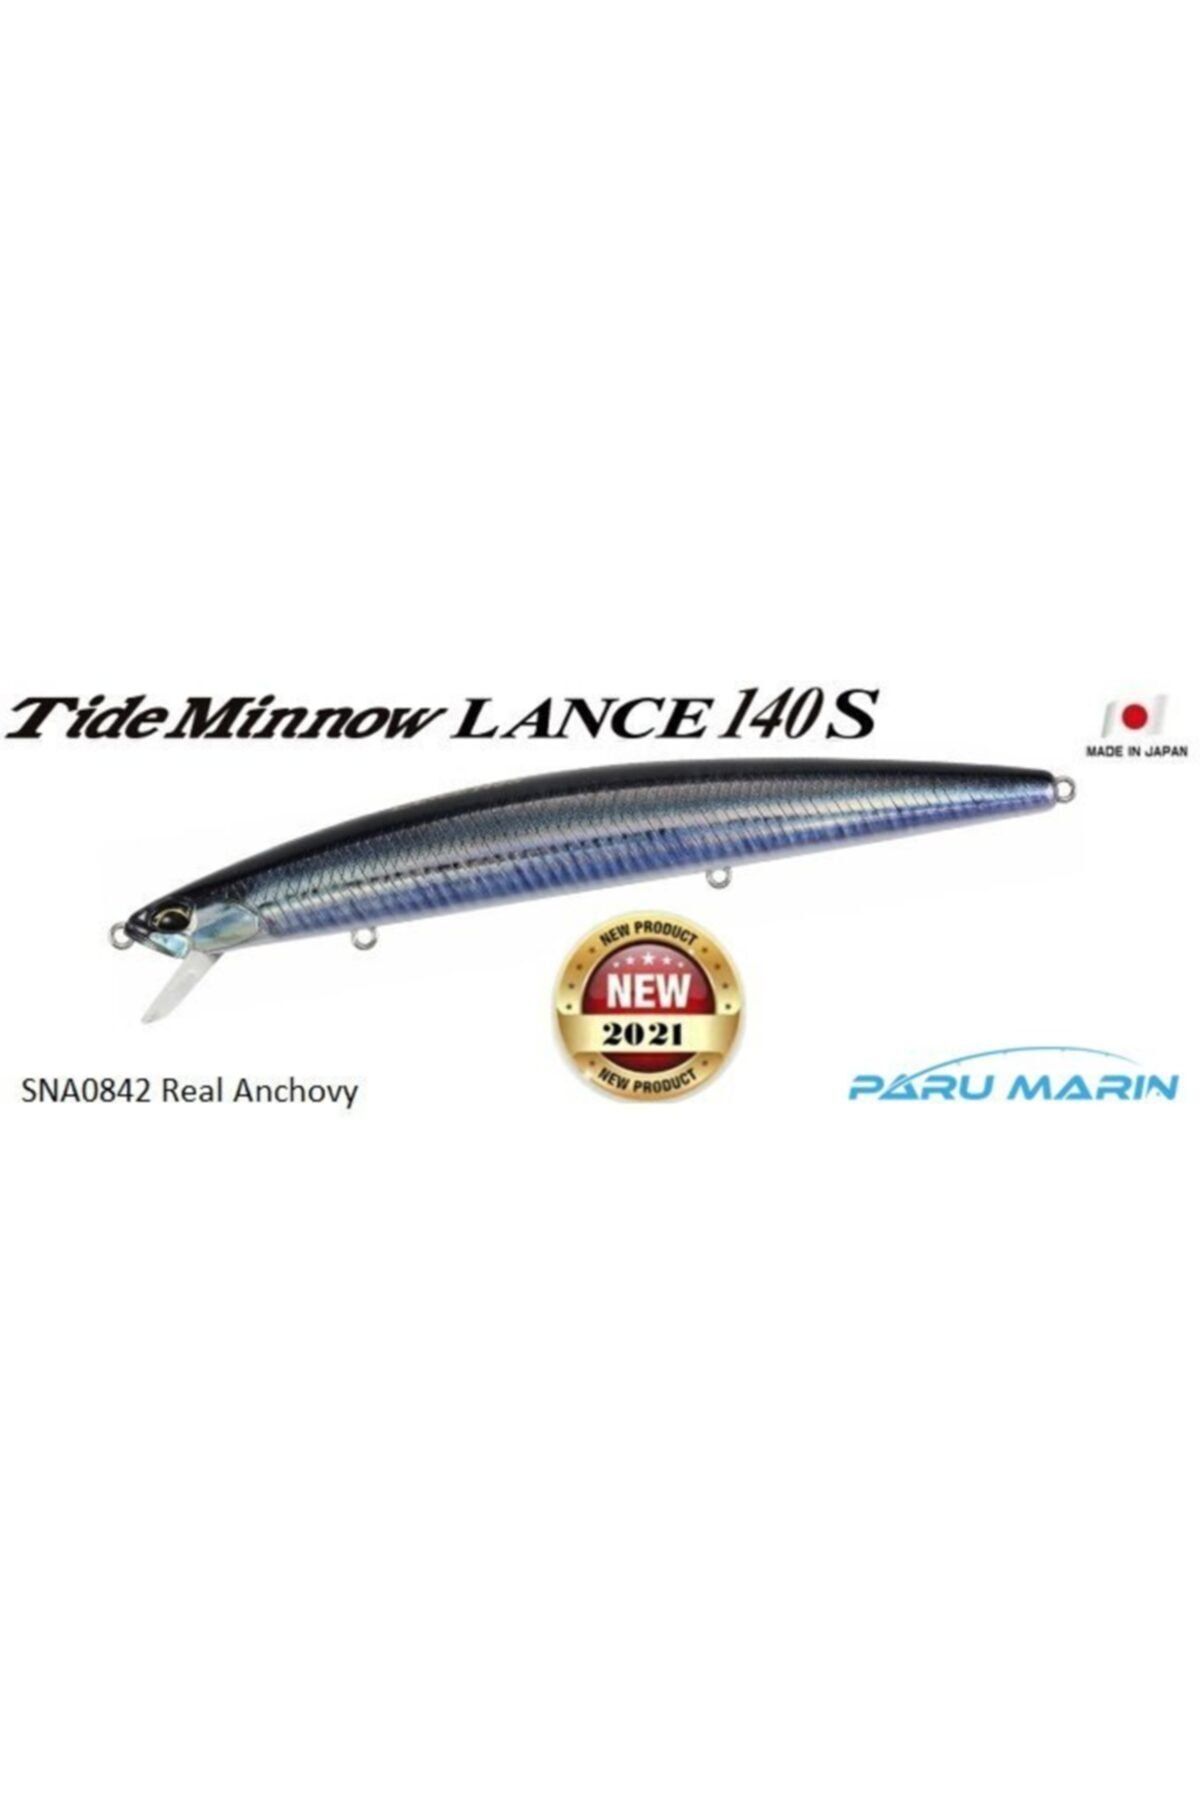 Duo Tide Minnow Lance 140s Sna0842 Real Anchovy